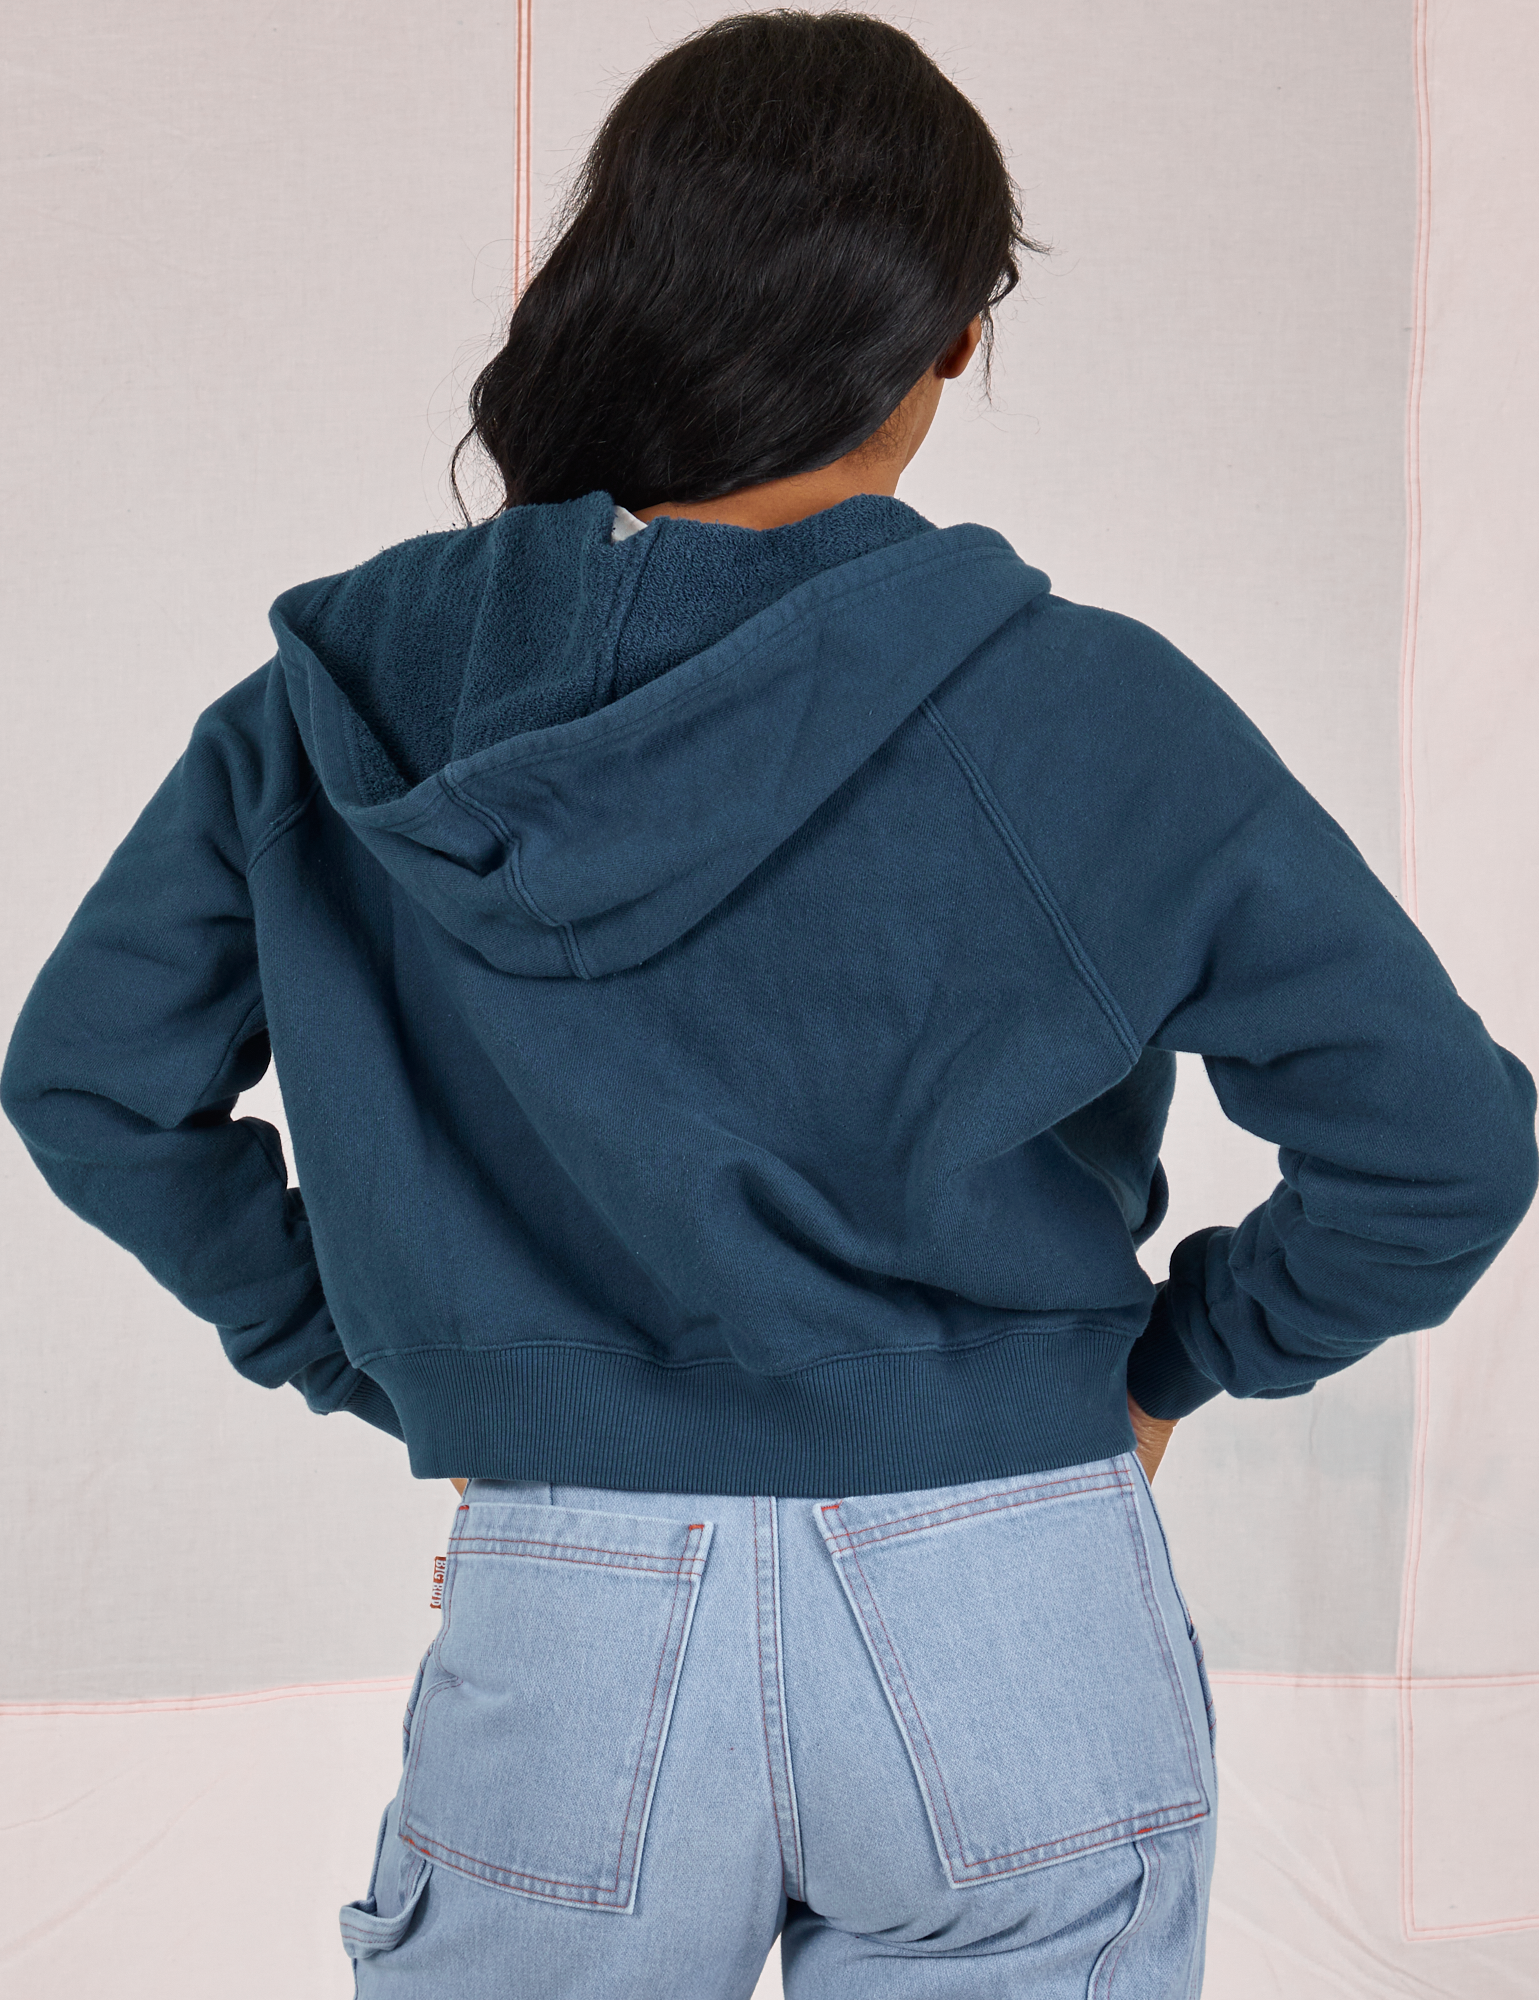 Cropped Zip Hoodie in Lagoon back view on Kandia